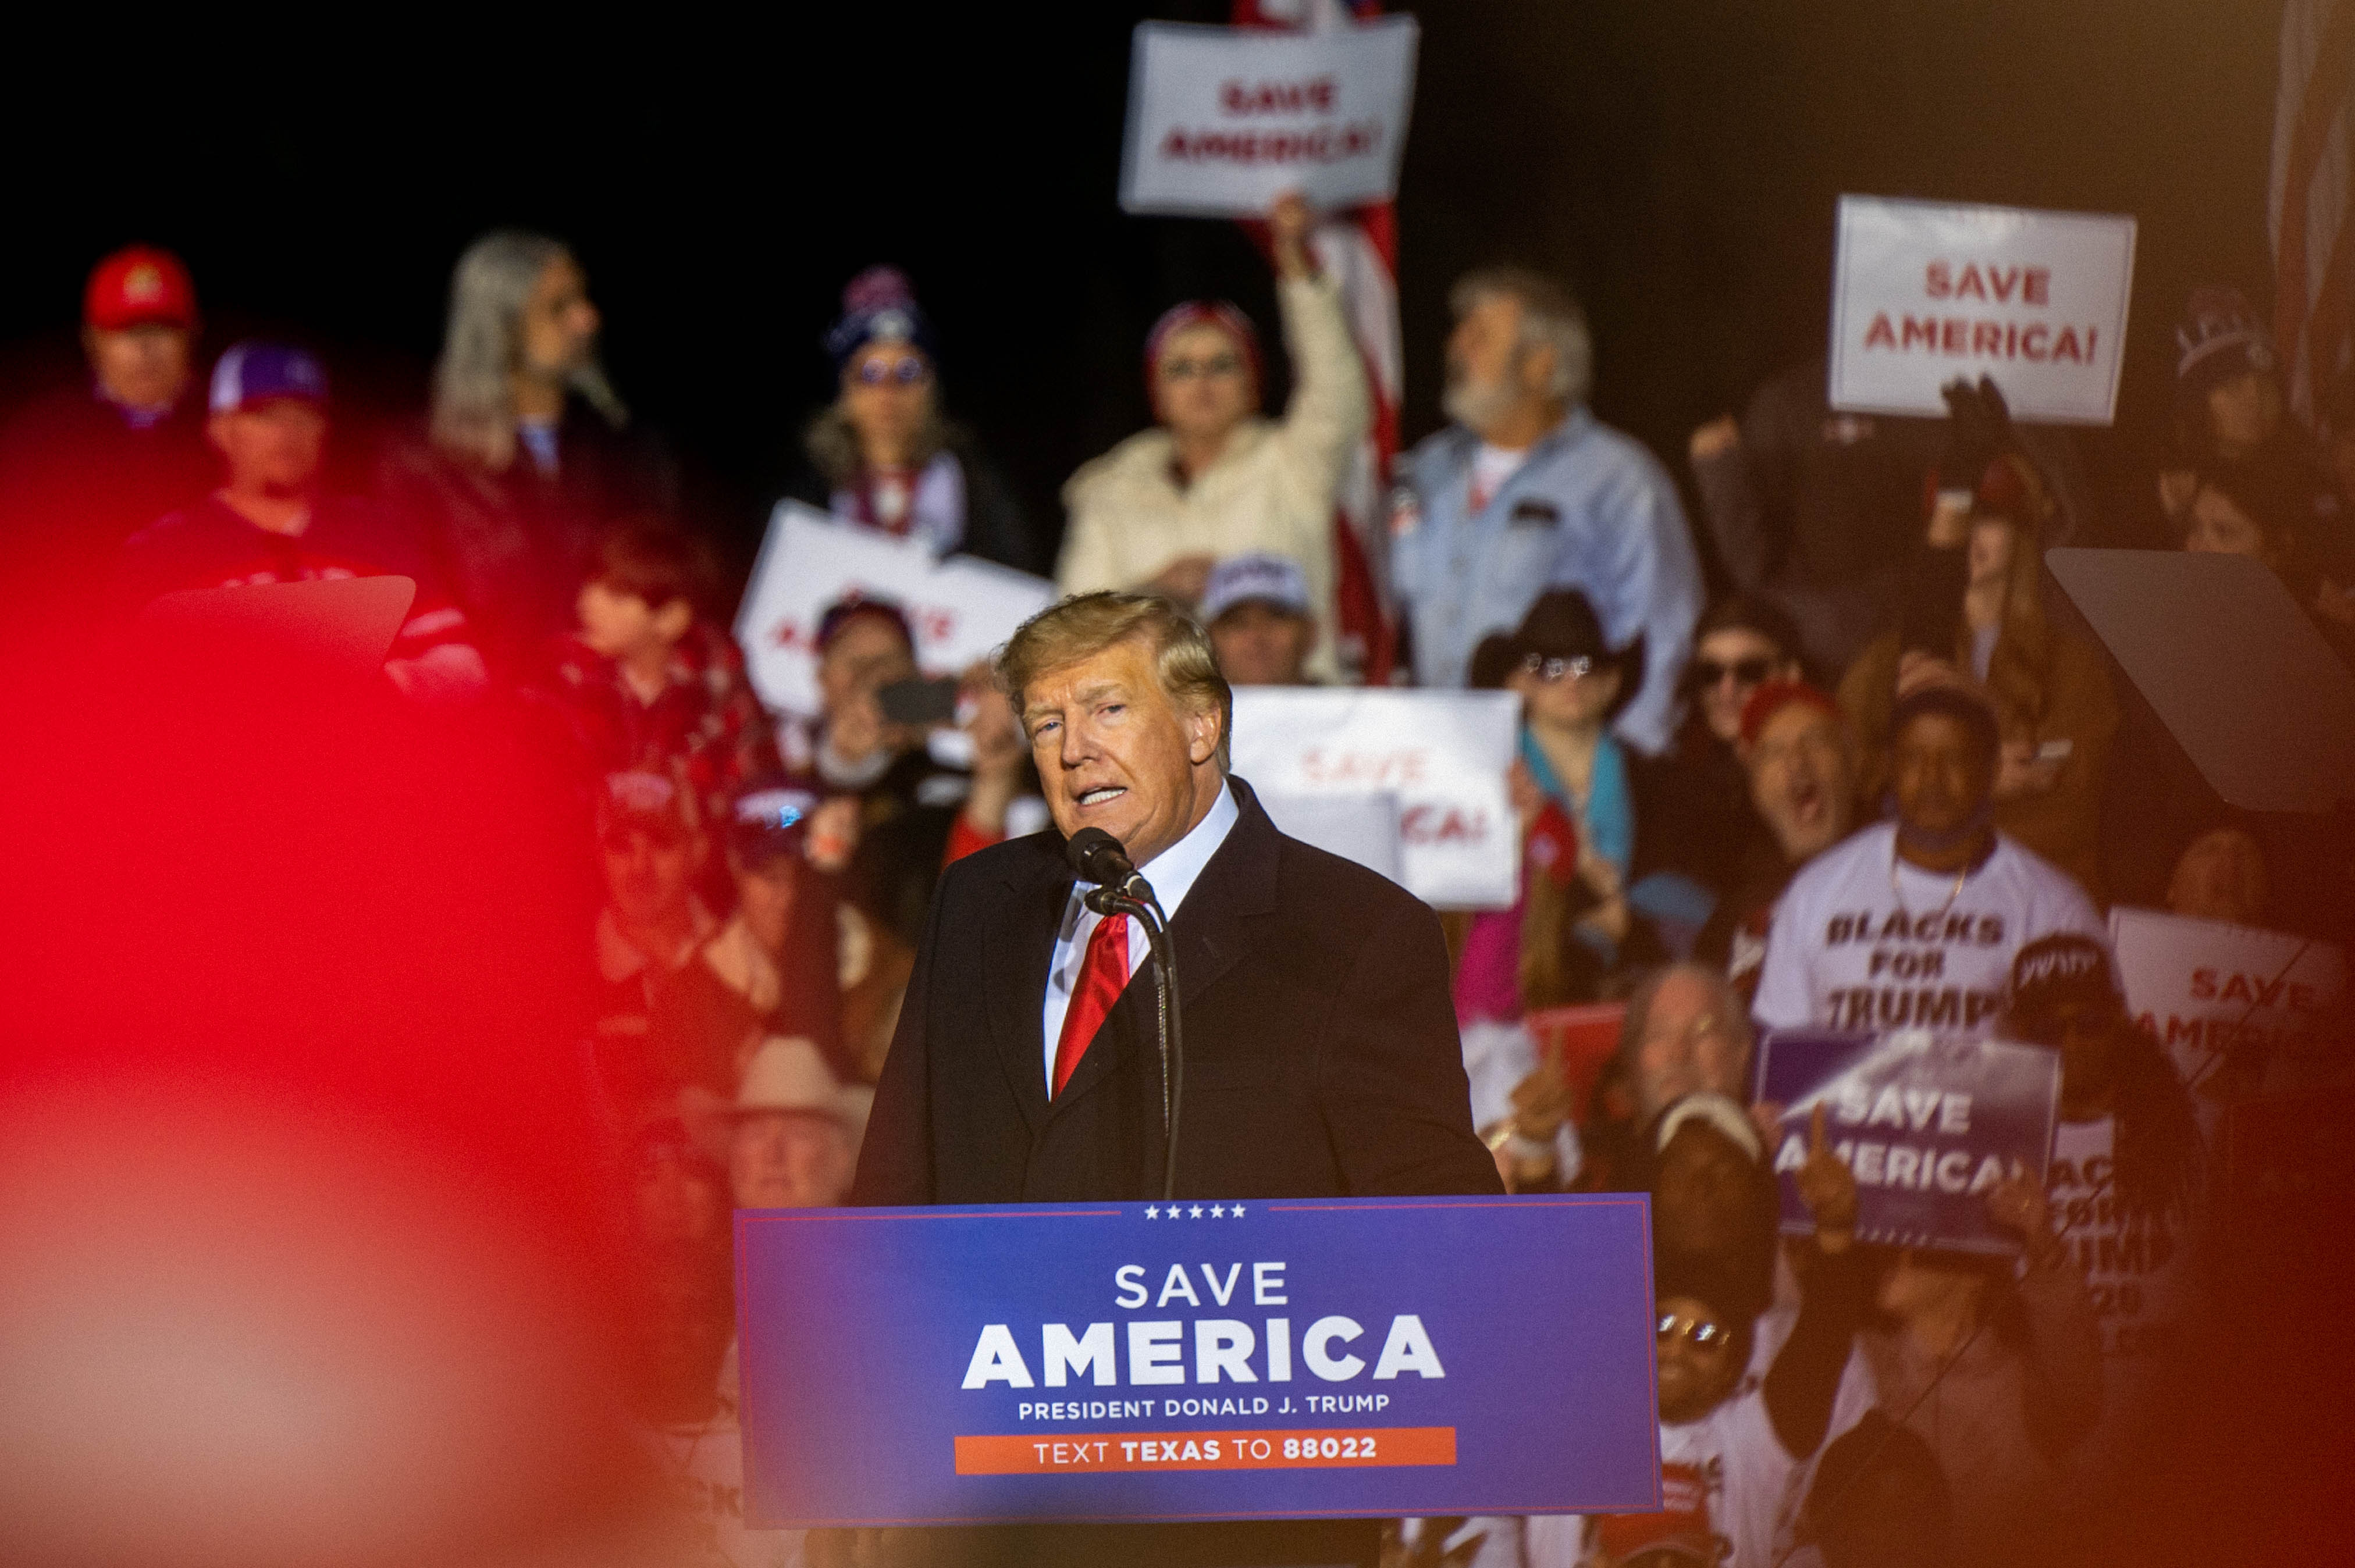 Former President Donald Trump speaks during the 'Save America' rally at the Montgomery County Fairgrounds on January 29, 2022 in Conroe, Texas